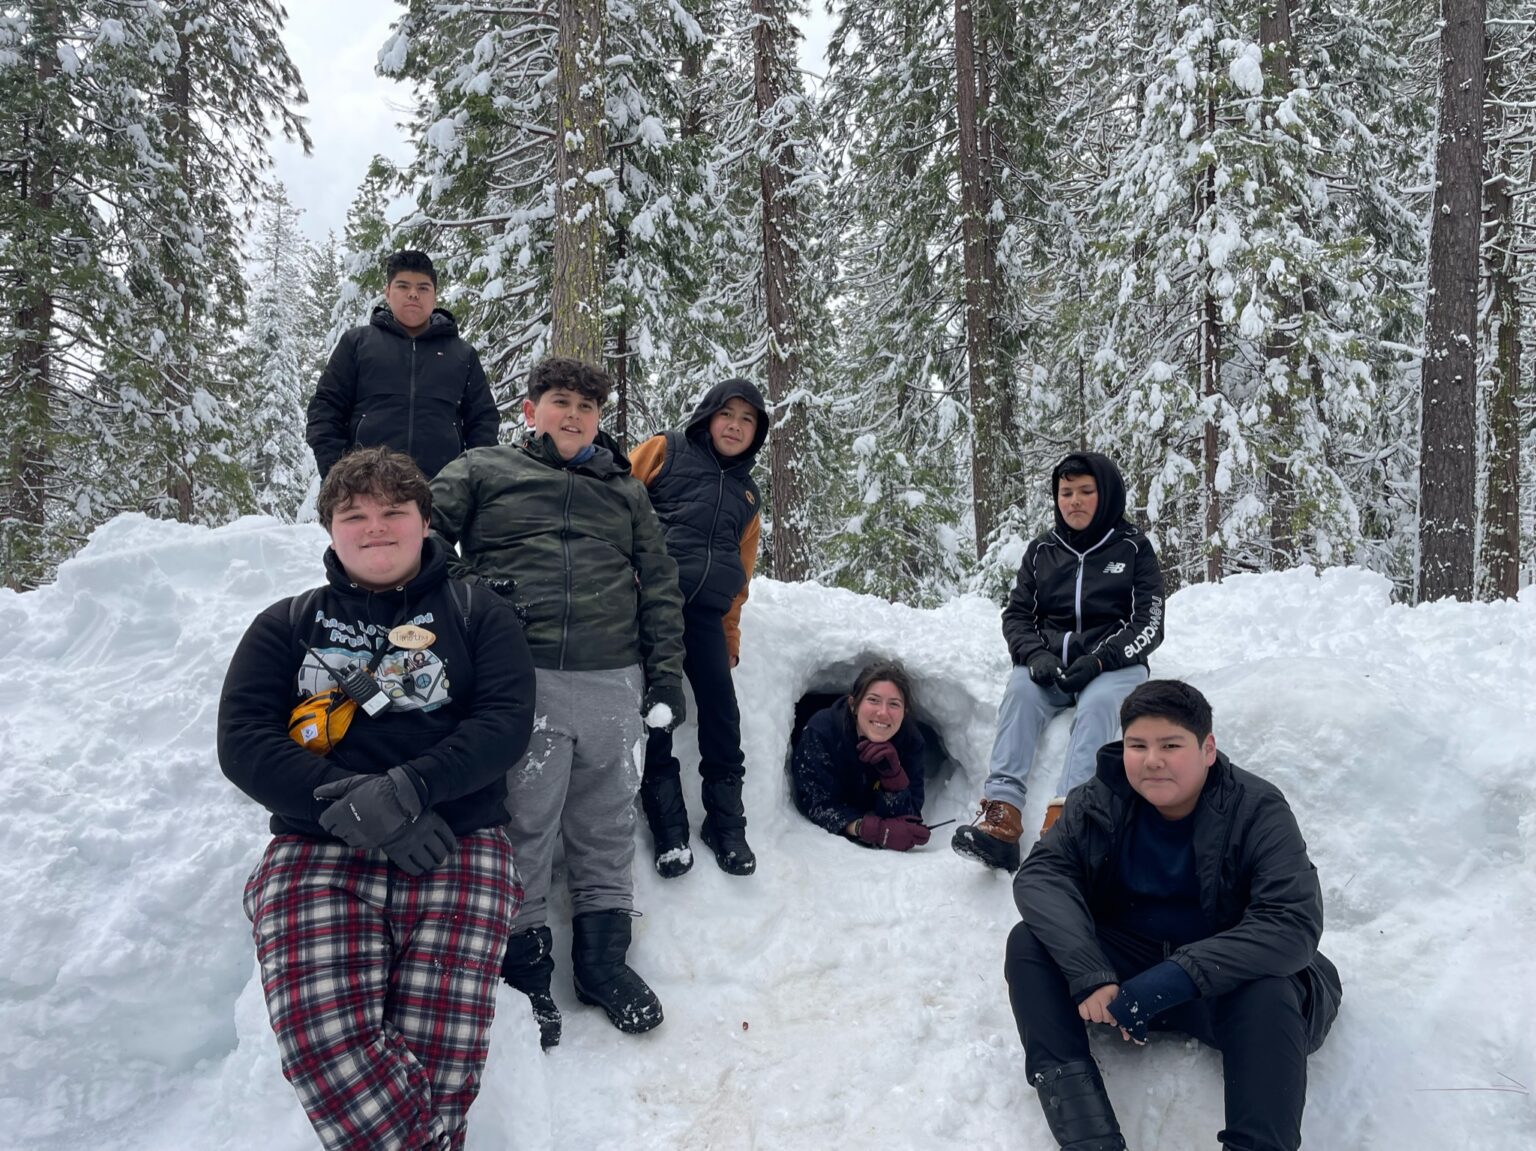 Students play in the snow during their stay at the Lair for Oski Science Camp.